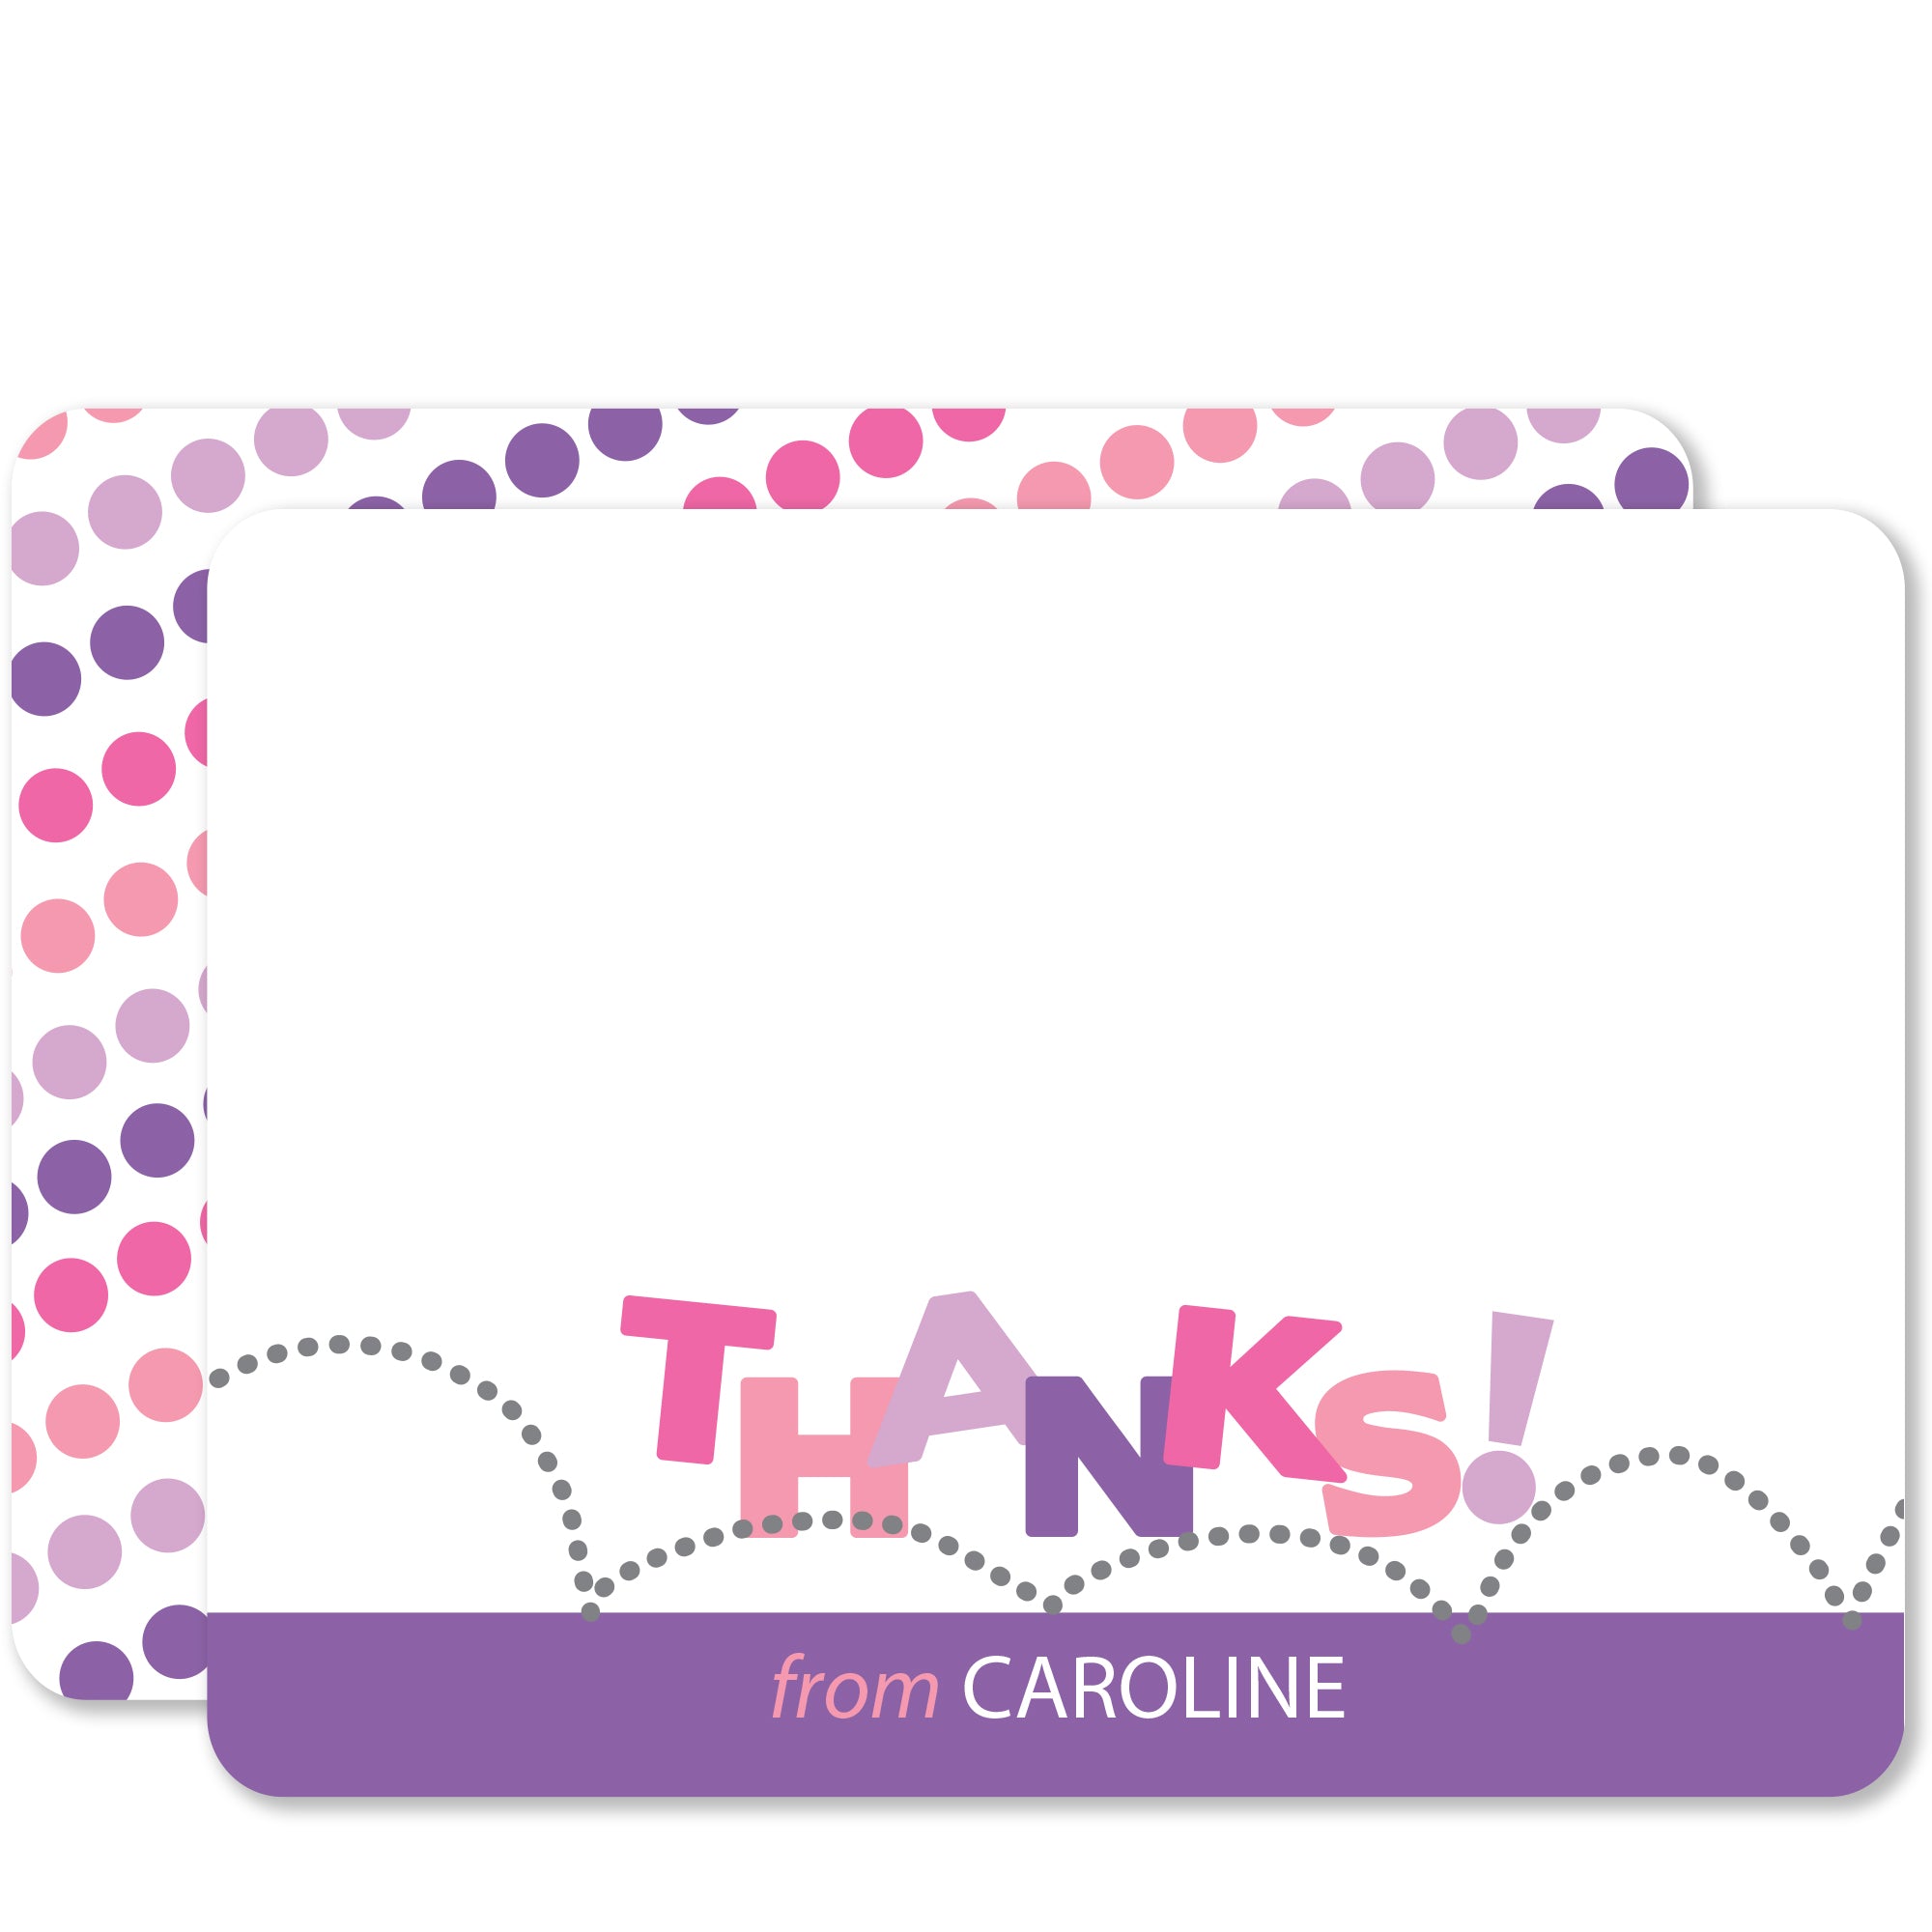 Bounce Jump Thank you notecards stationer in pink and purple. The word "Thanks" bounces across a trampoline, cute polka dot pattern on the back, heavy cardstock